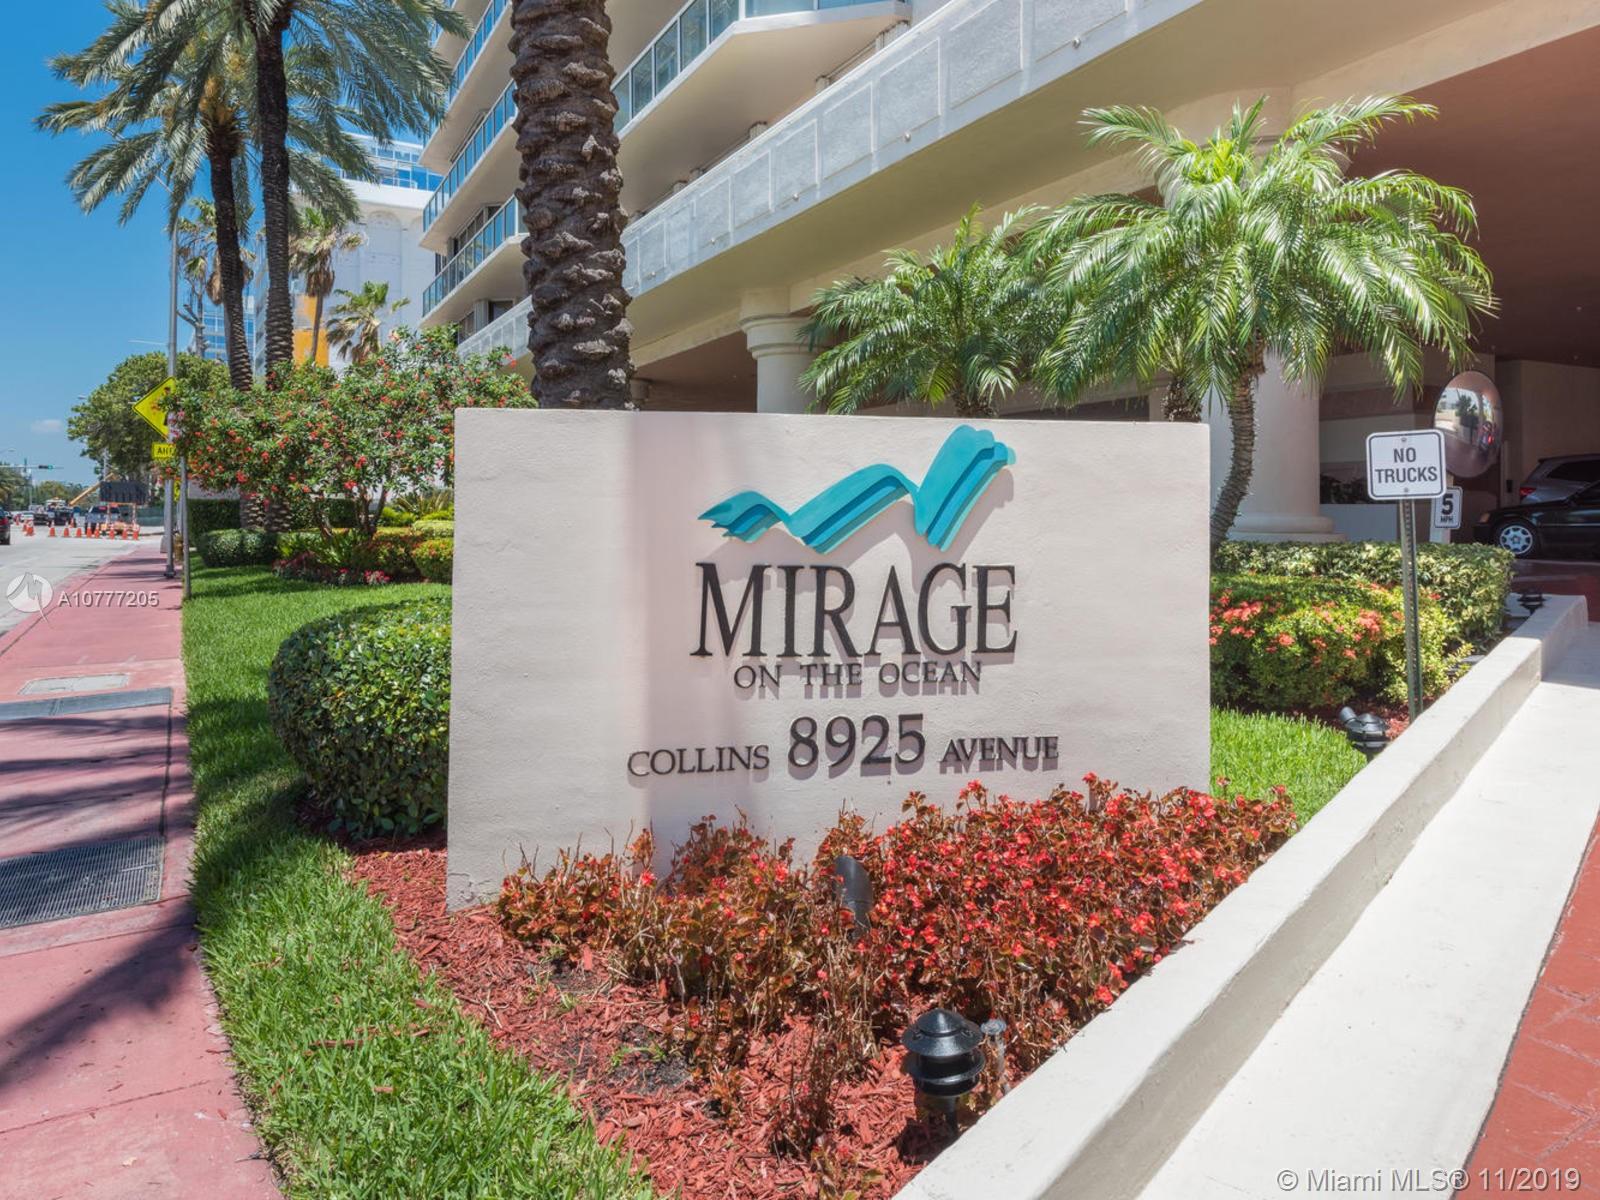 Mirage on the Ocean entrance.